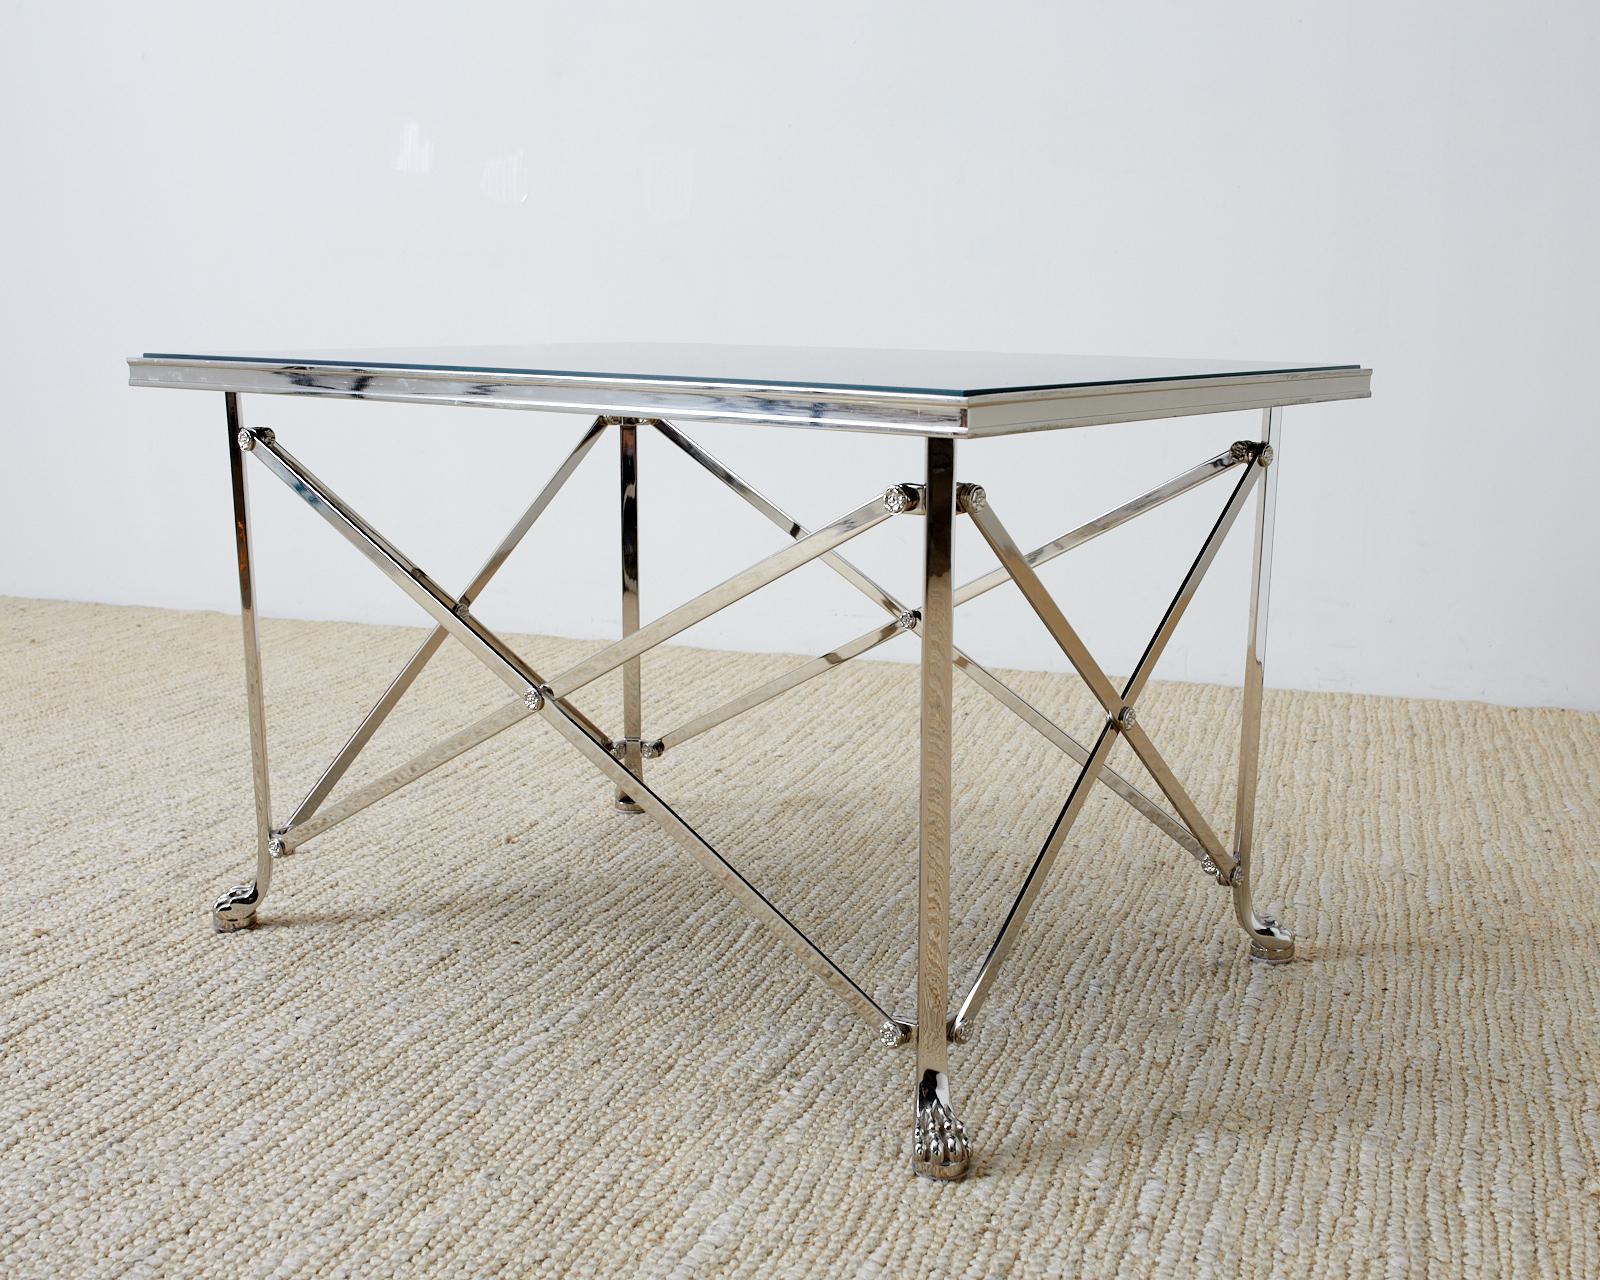 Fantastic coffee cocktail table featuring a black glass top supported by a nickel plated Campaign style base. Made in the Roman neoclassical or Grand Tour taste. The base has a high polish finish with solid construction and superior craftsmanship